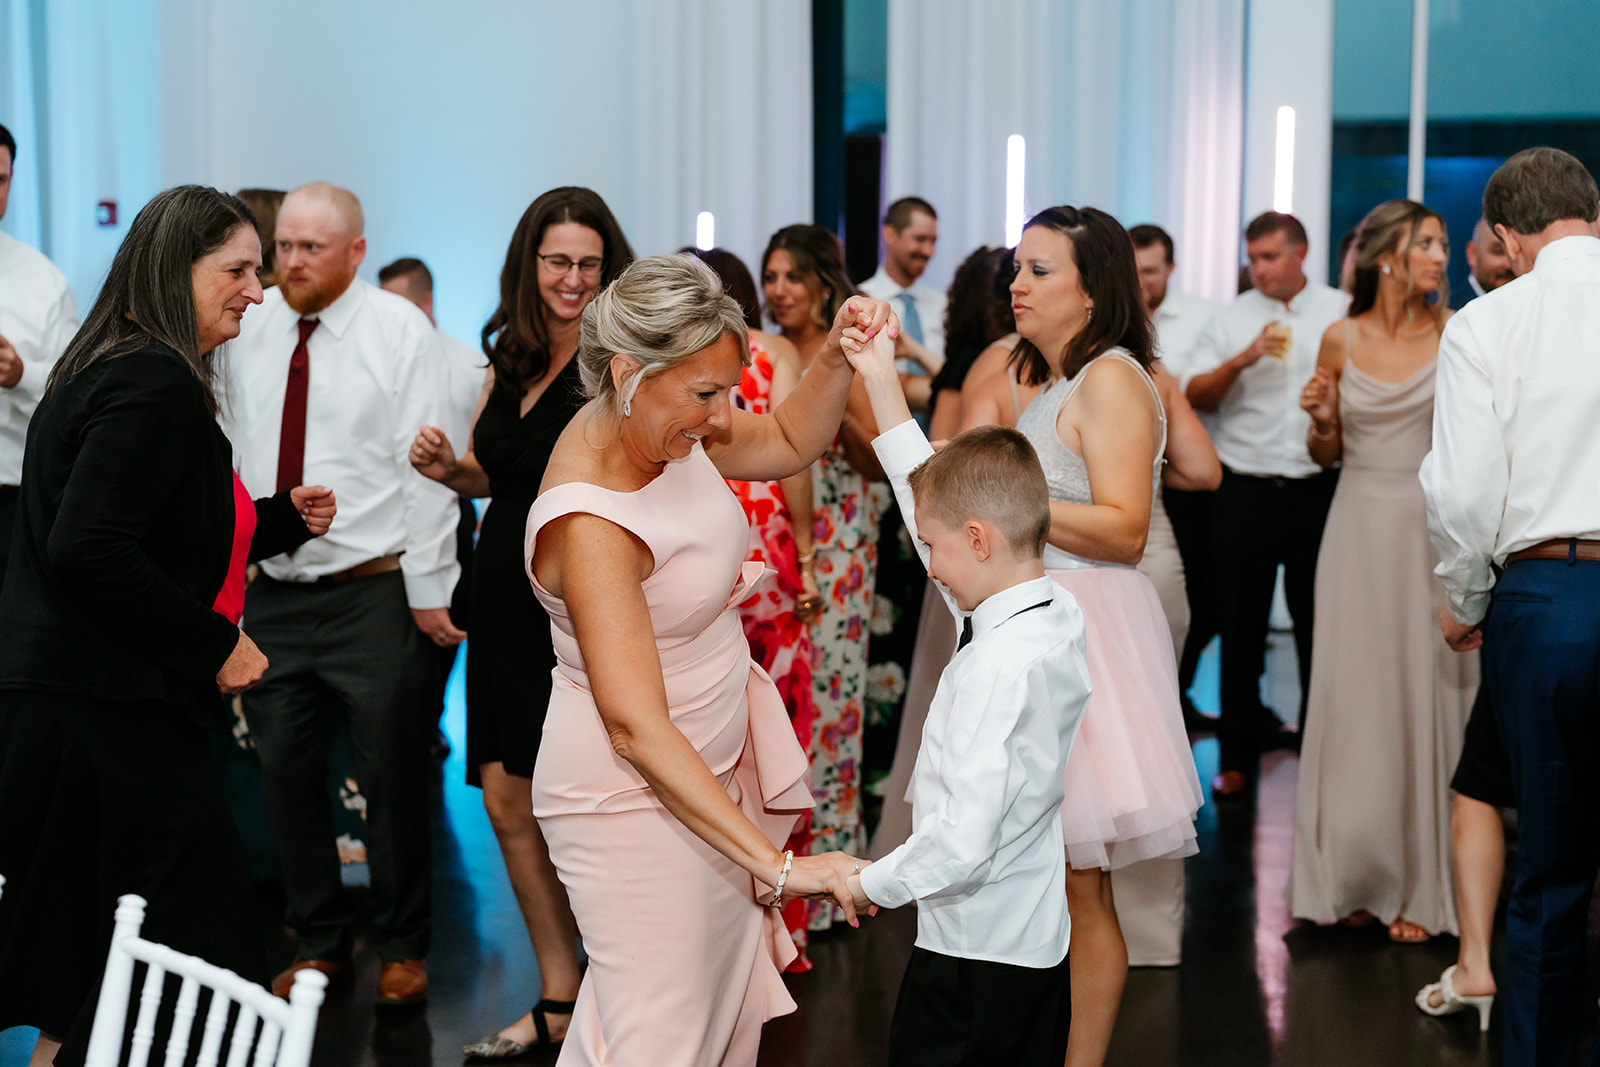 A woman in a pink dress dances with a young boy in a white shirt and black pants at a wedding at Lakeview pavilion while other guests look on and dance in the background.